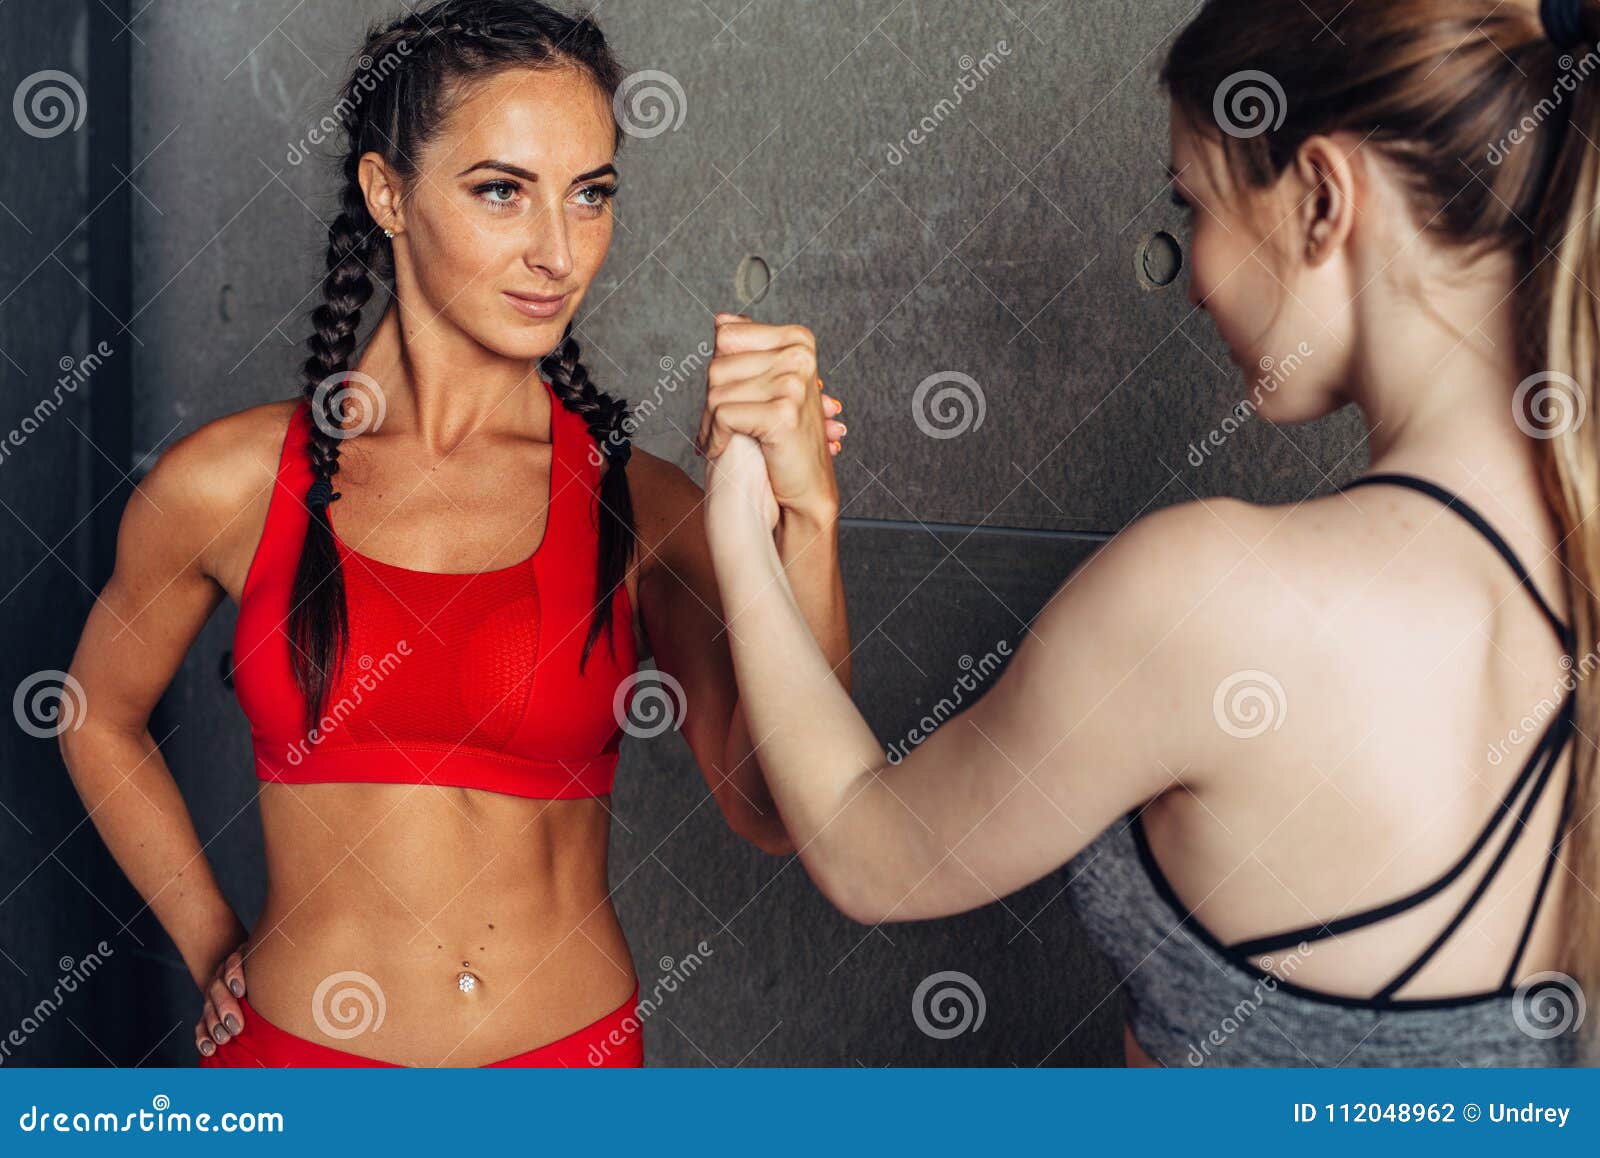 fit women holding hands with a female opponent looking in her eyes.